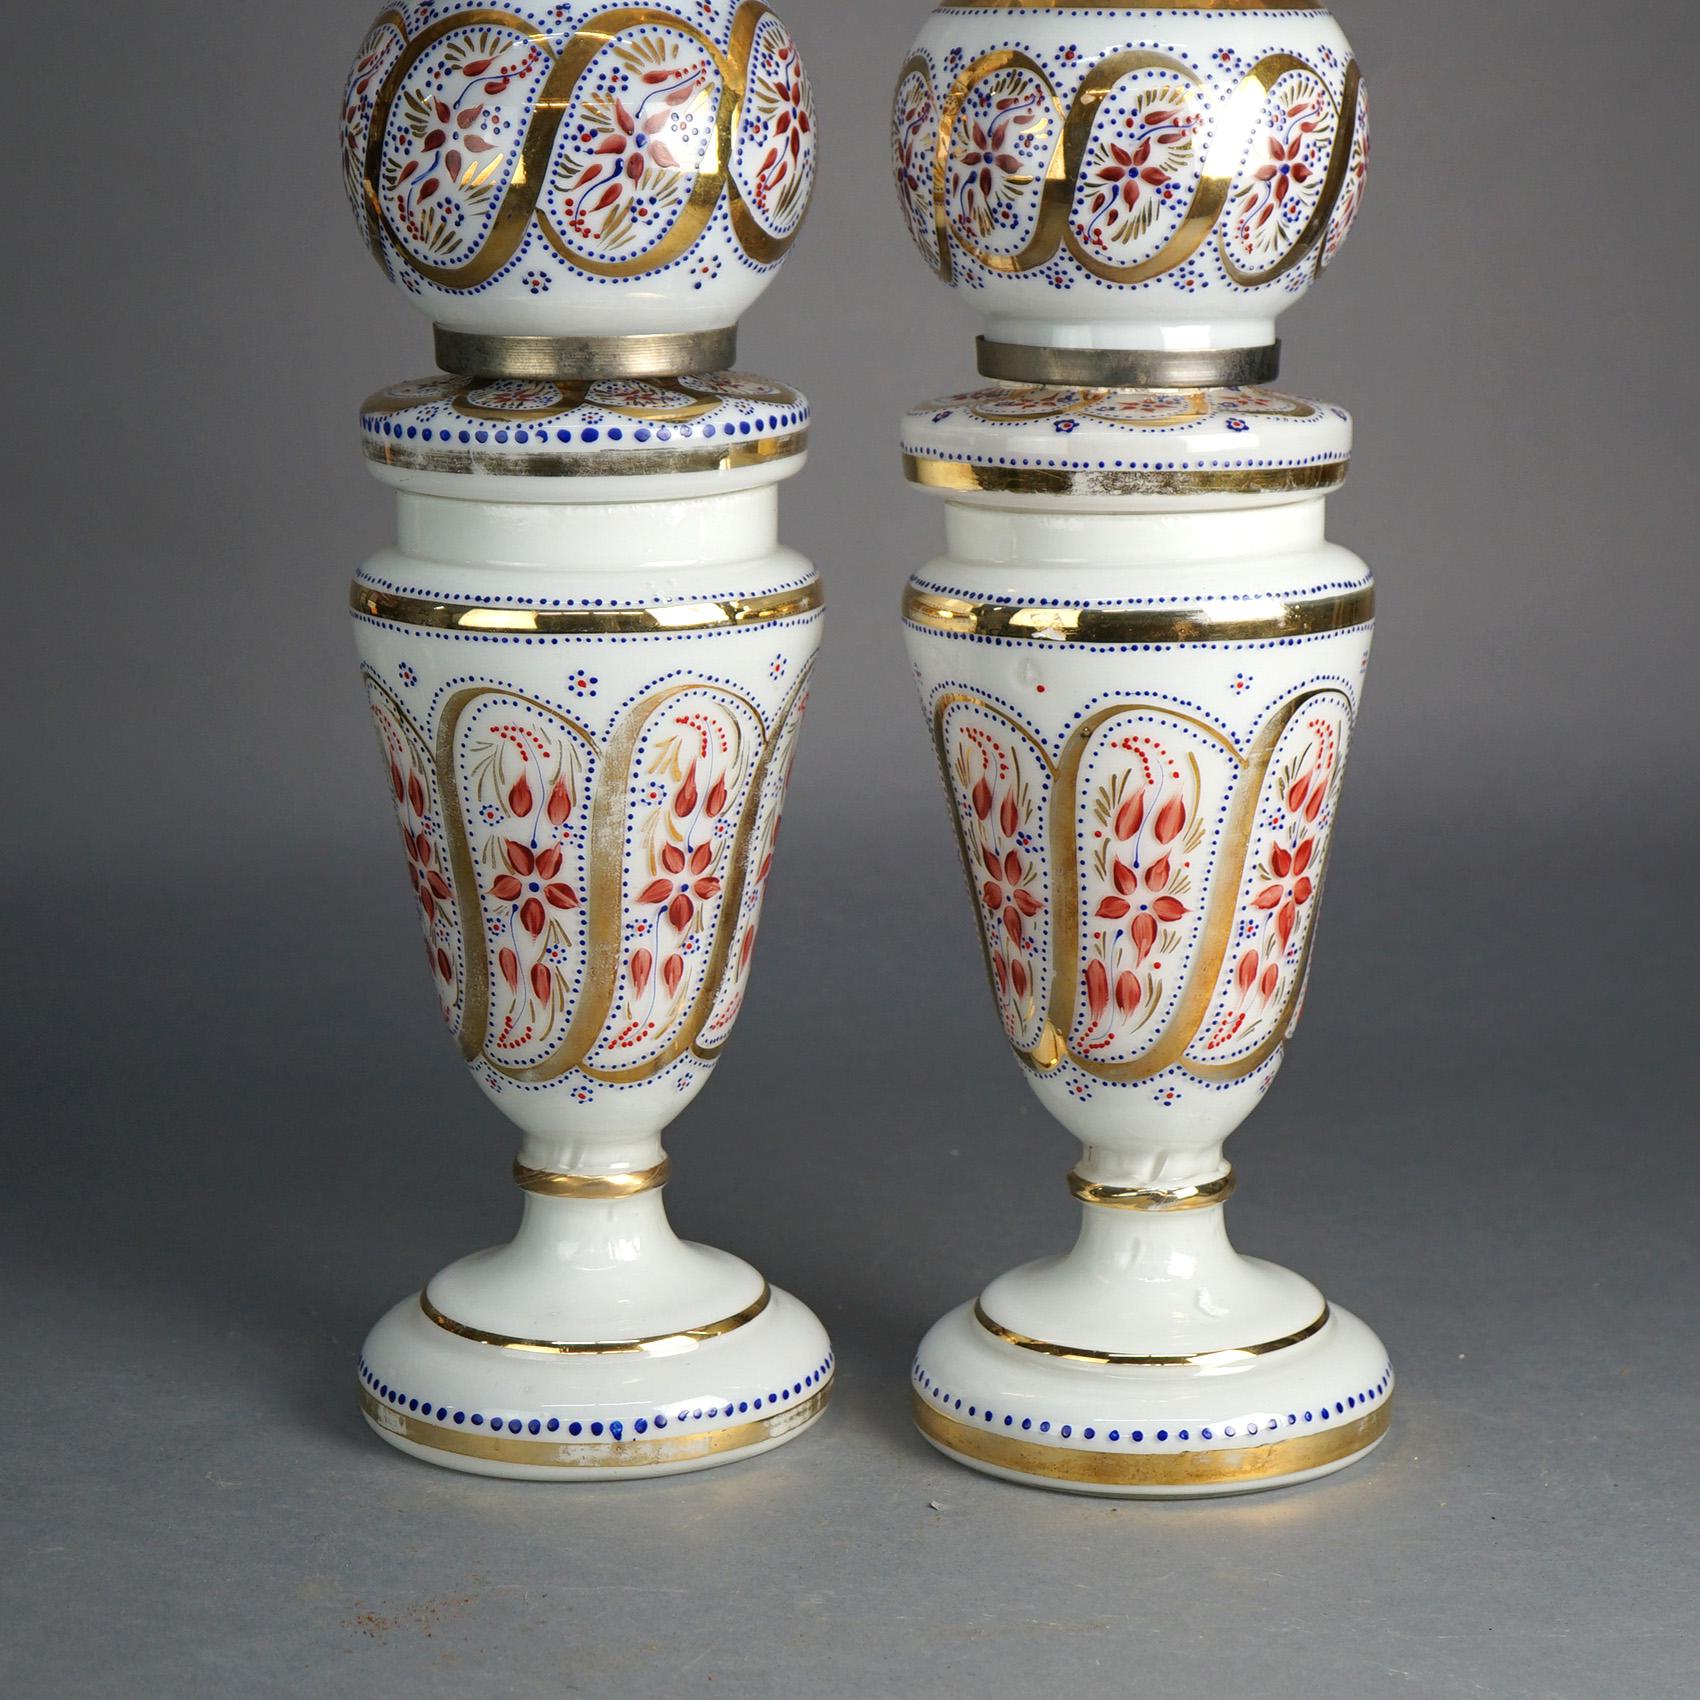 Antique Pair Opaline Floral Enameled Hand Painted Lamps With Handkerchief Shades For Sale 3